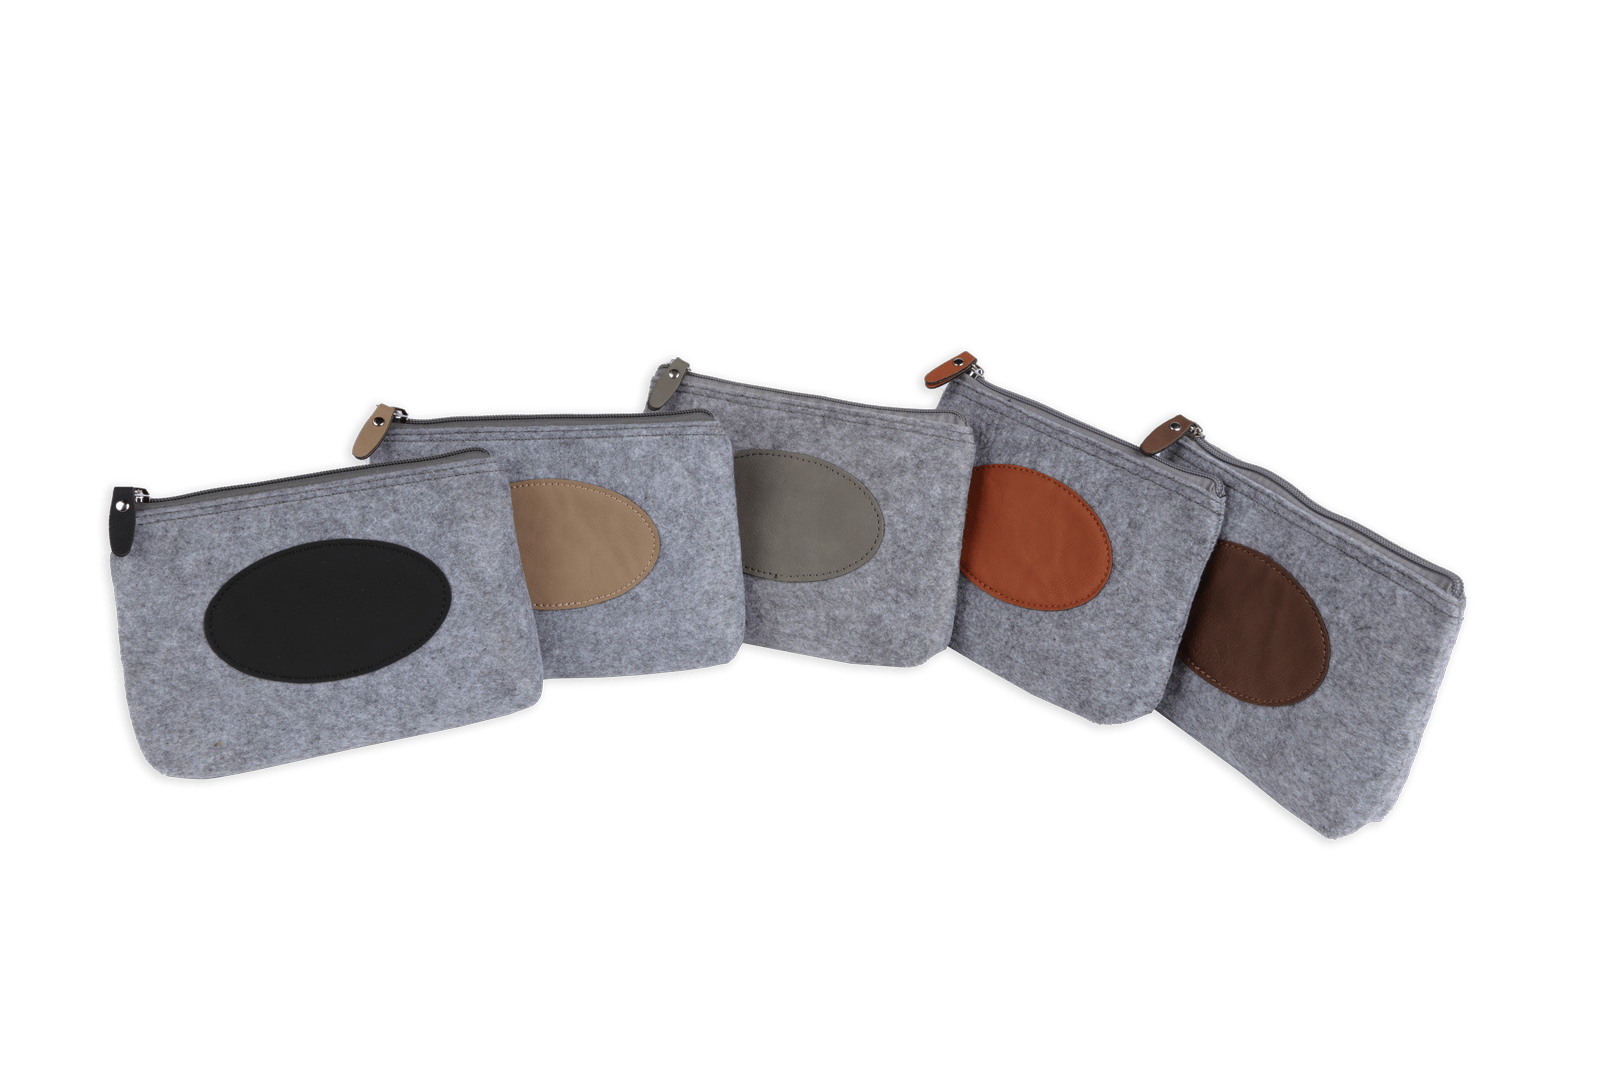 flannel travel bags in five different color options